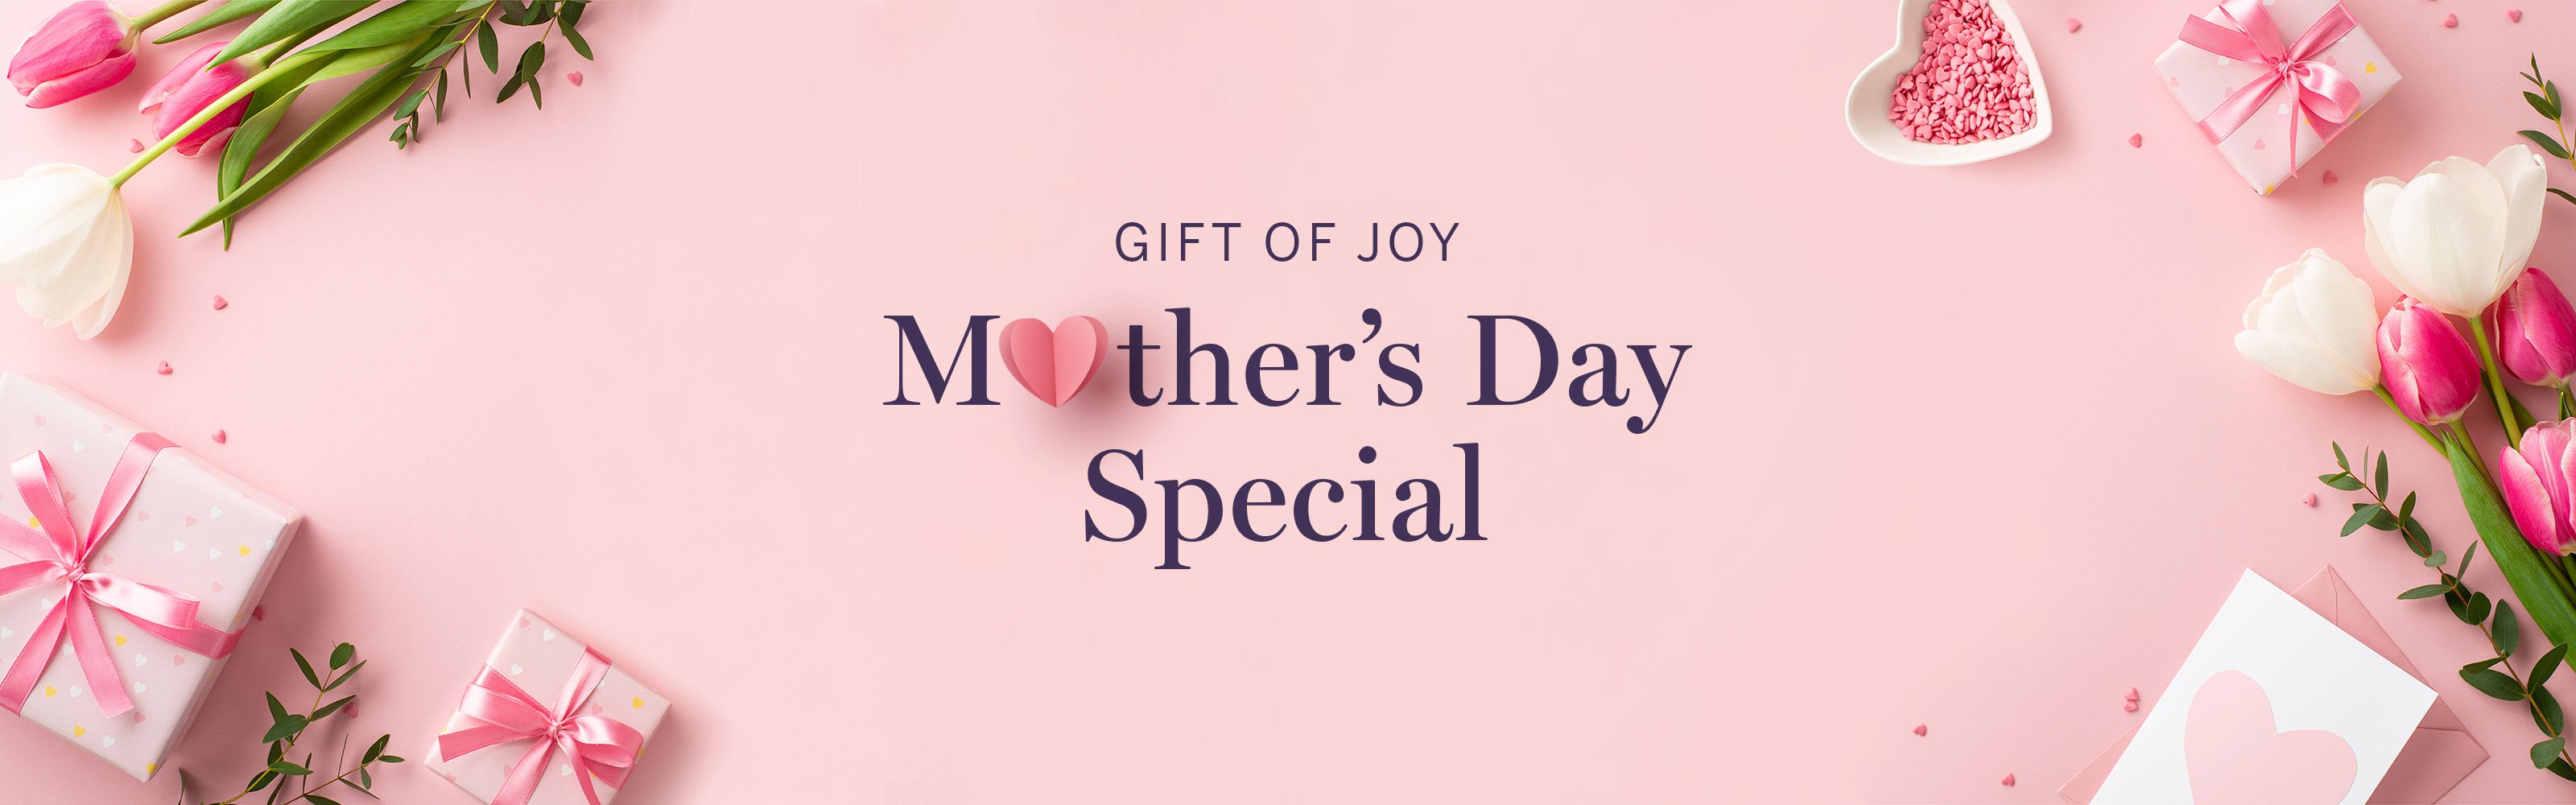 KrisShop Mother's Day Special